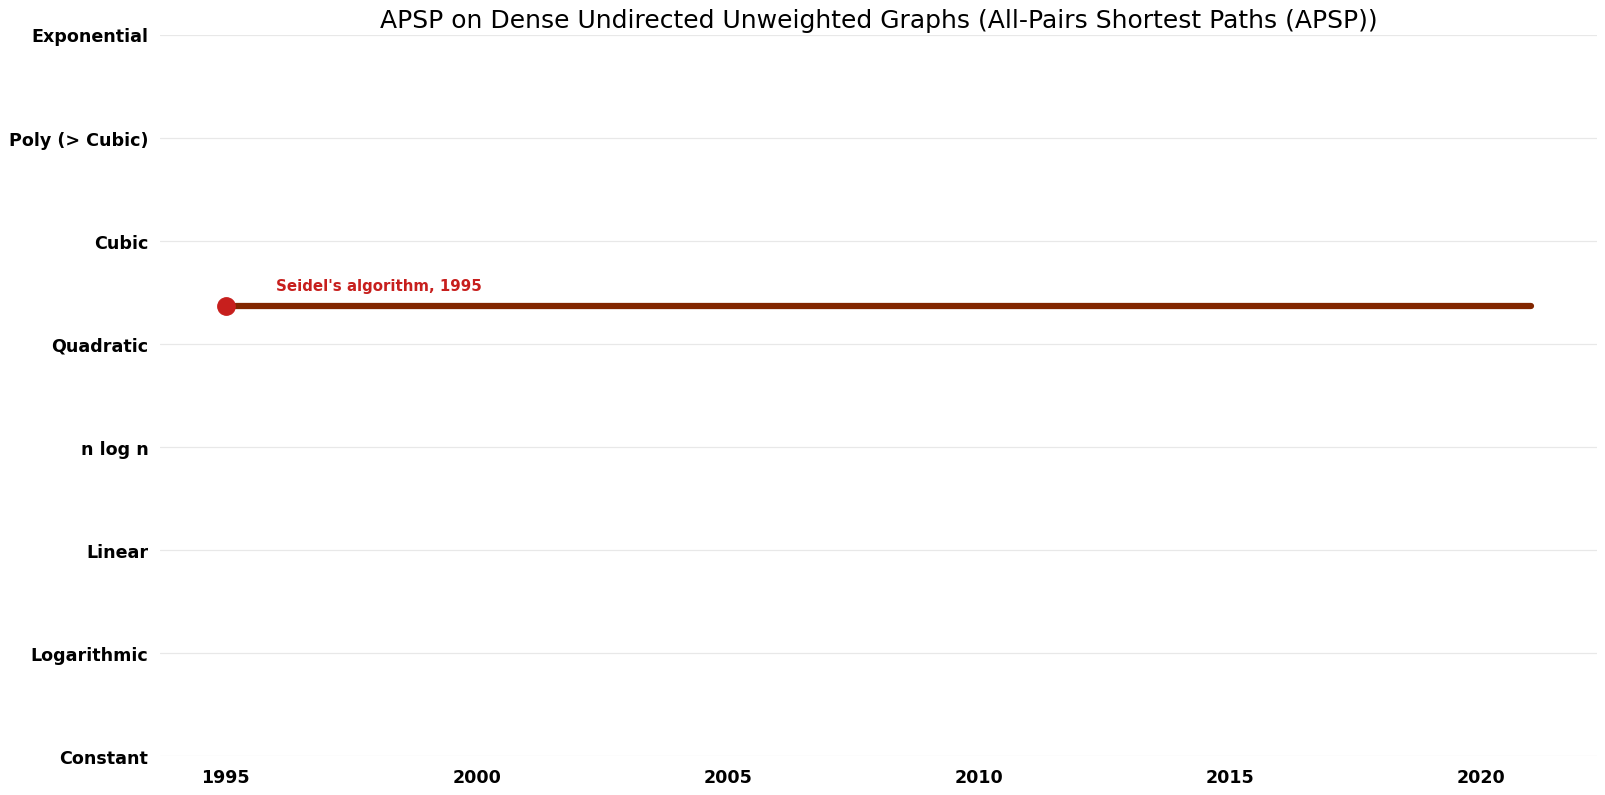 All-Pairs Shortest Paths (APSP) - APSP on Dense Undirected Unweighted Graphs - Time.png